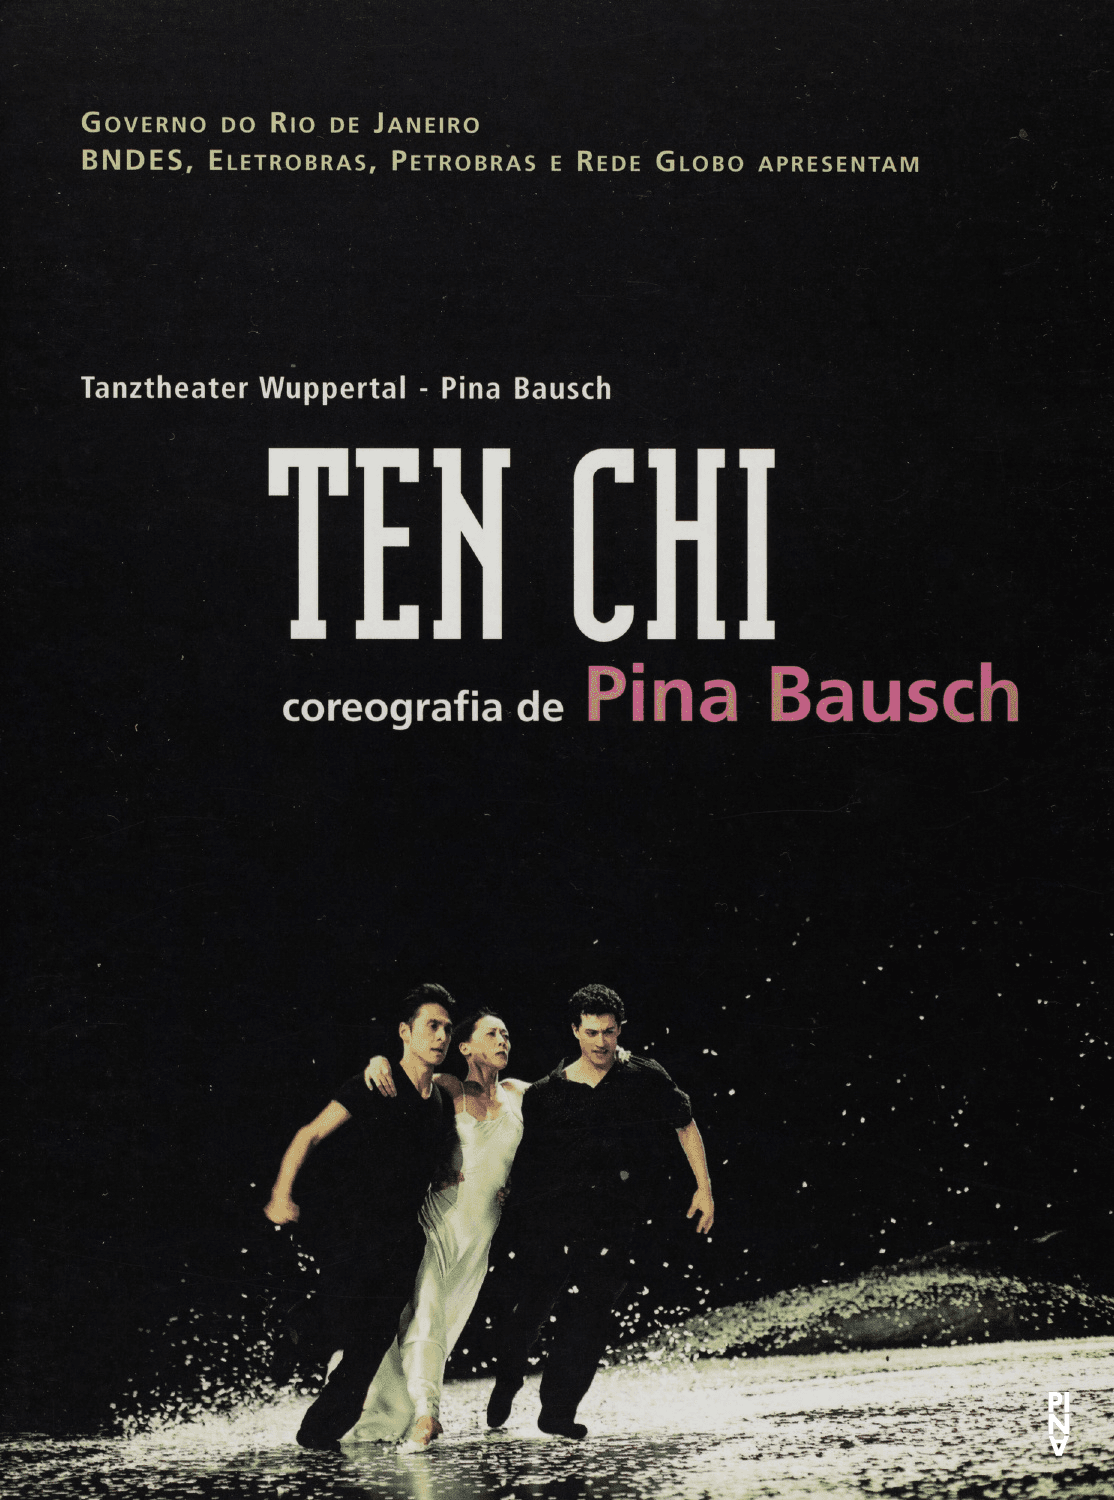 Booklet for “Ten Chi” by Pina Bausch with Tanztheater Wuppertal in in Rio de Janeiro, 04/05/2011 – 04/07/2011